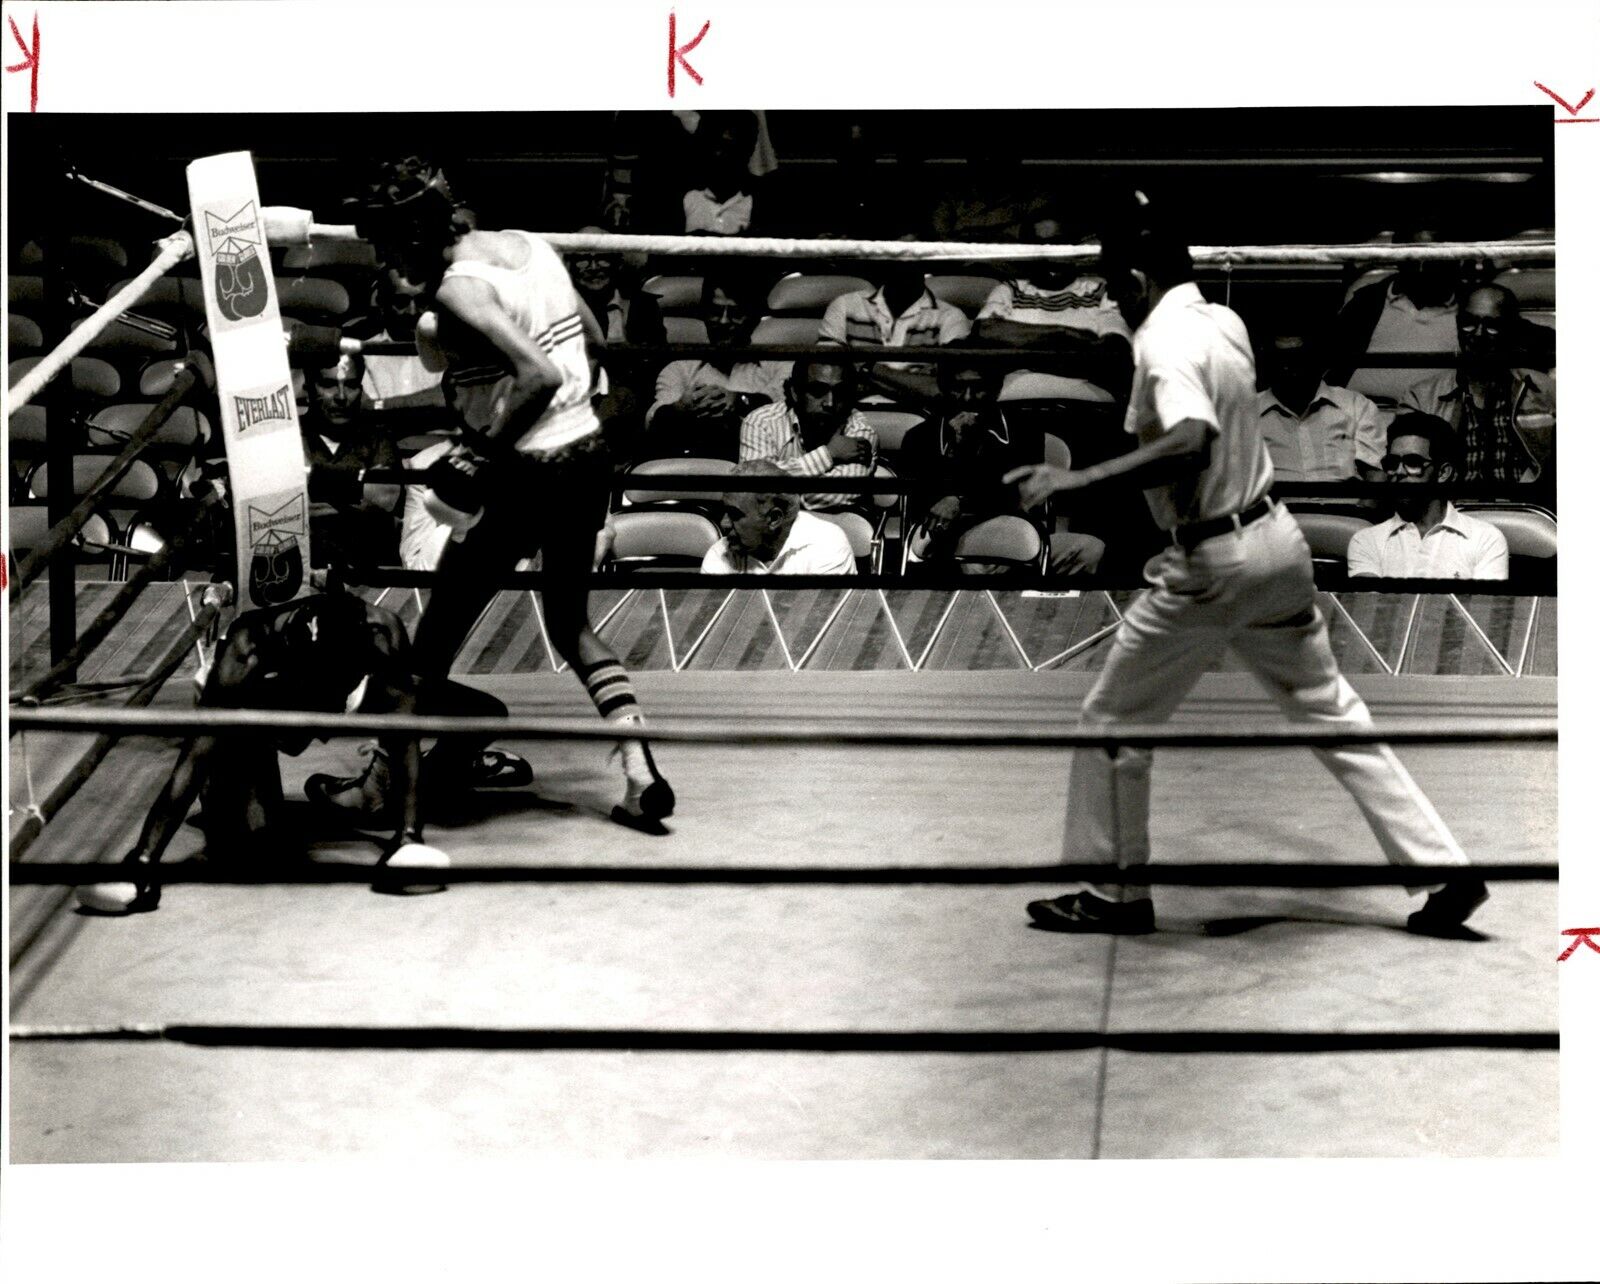 LG908 1984 Original Photo GOLDEN GLOVES BOXING KNOCK OUT ACTION Fighter Down